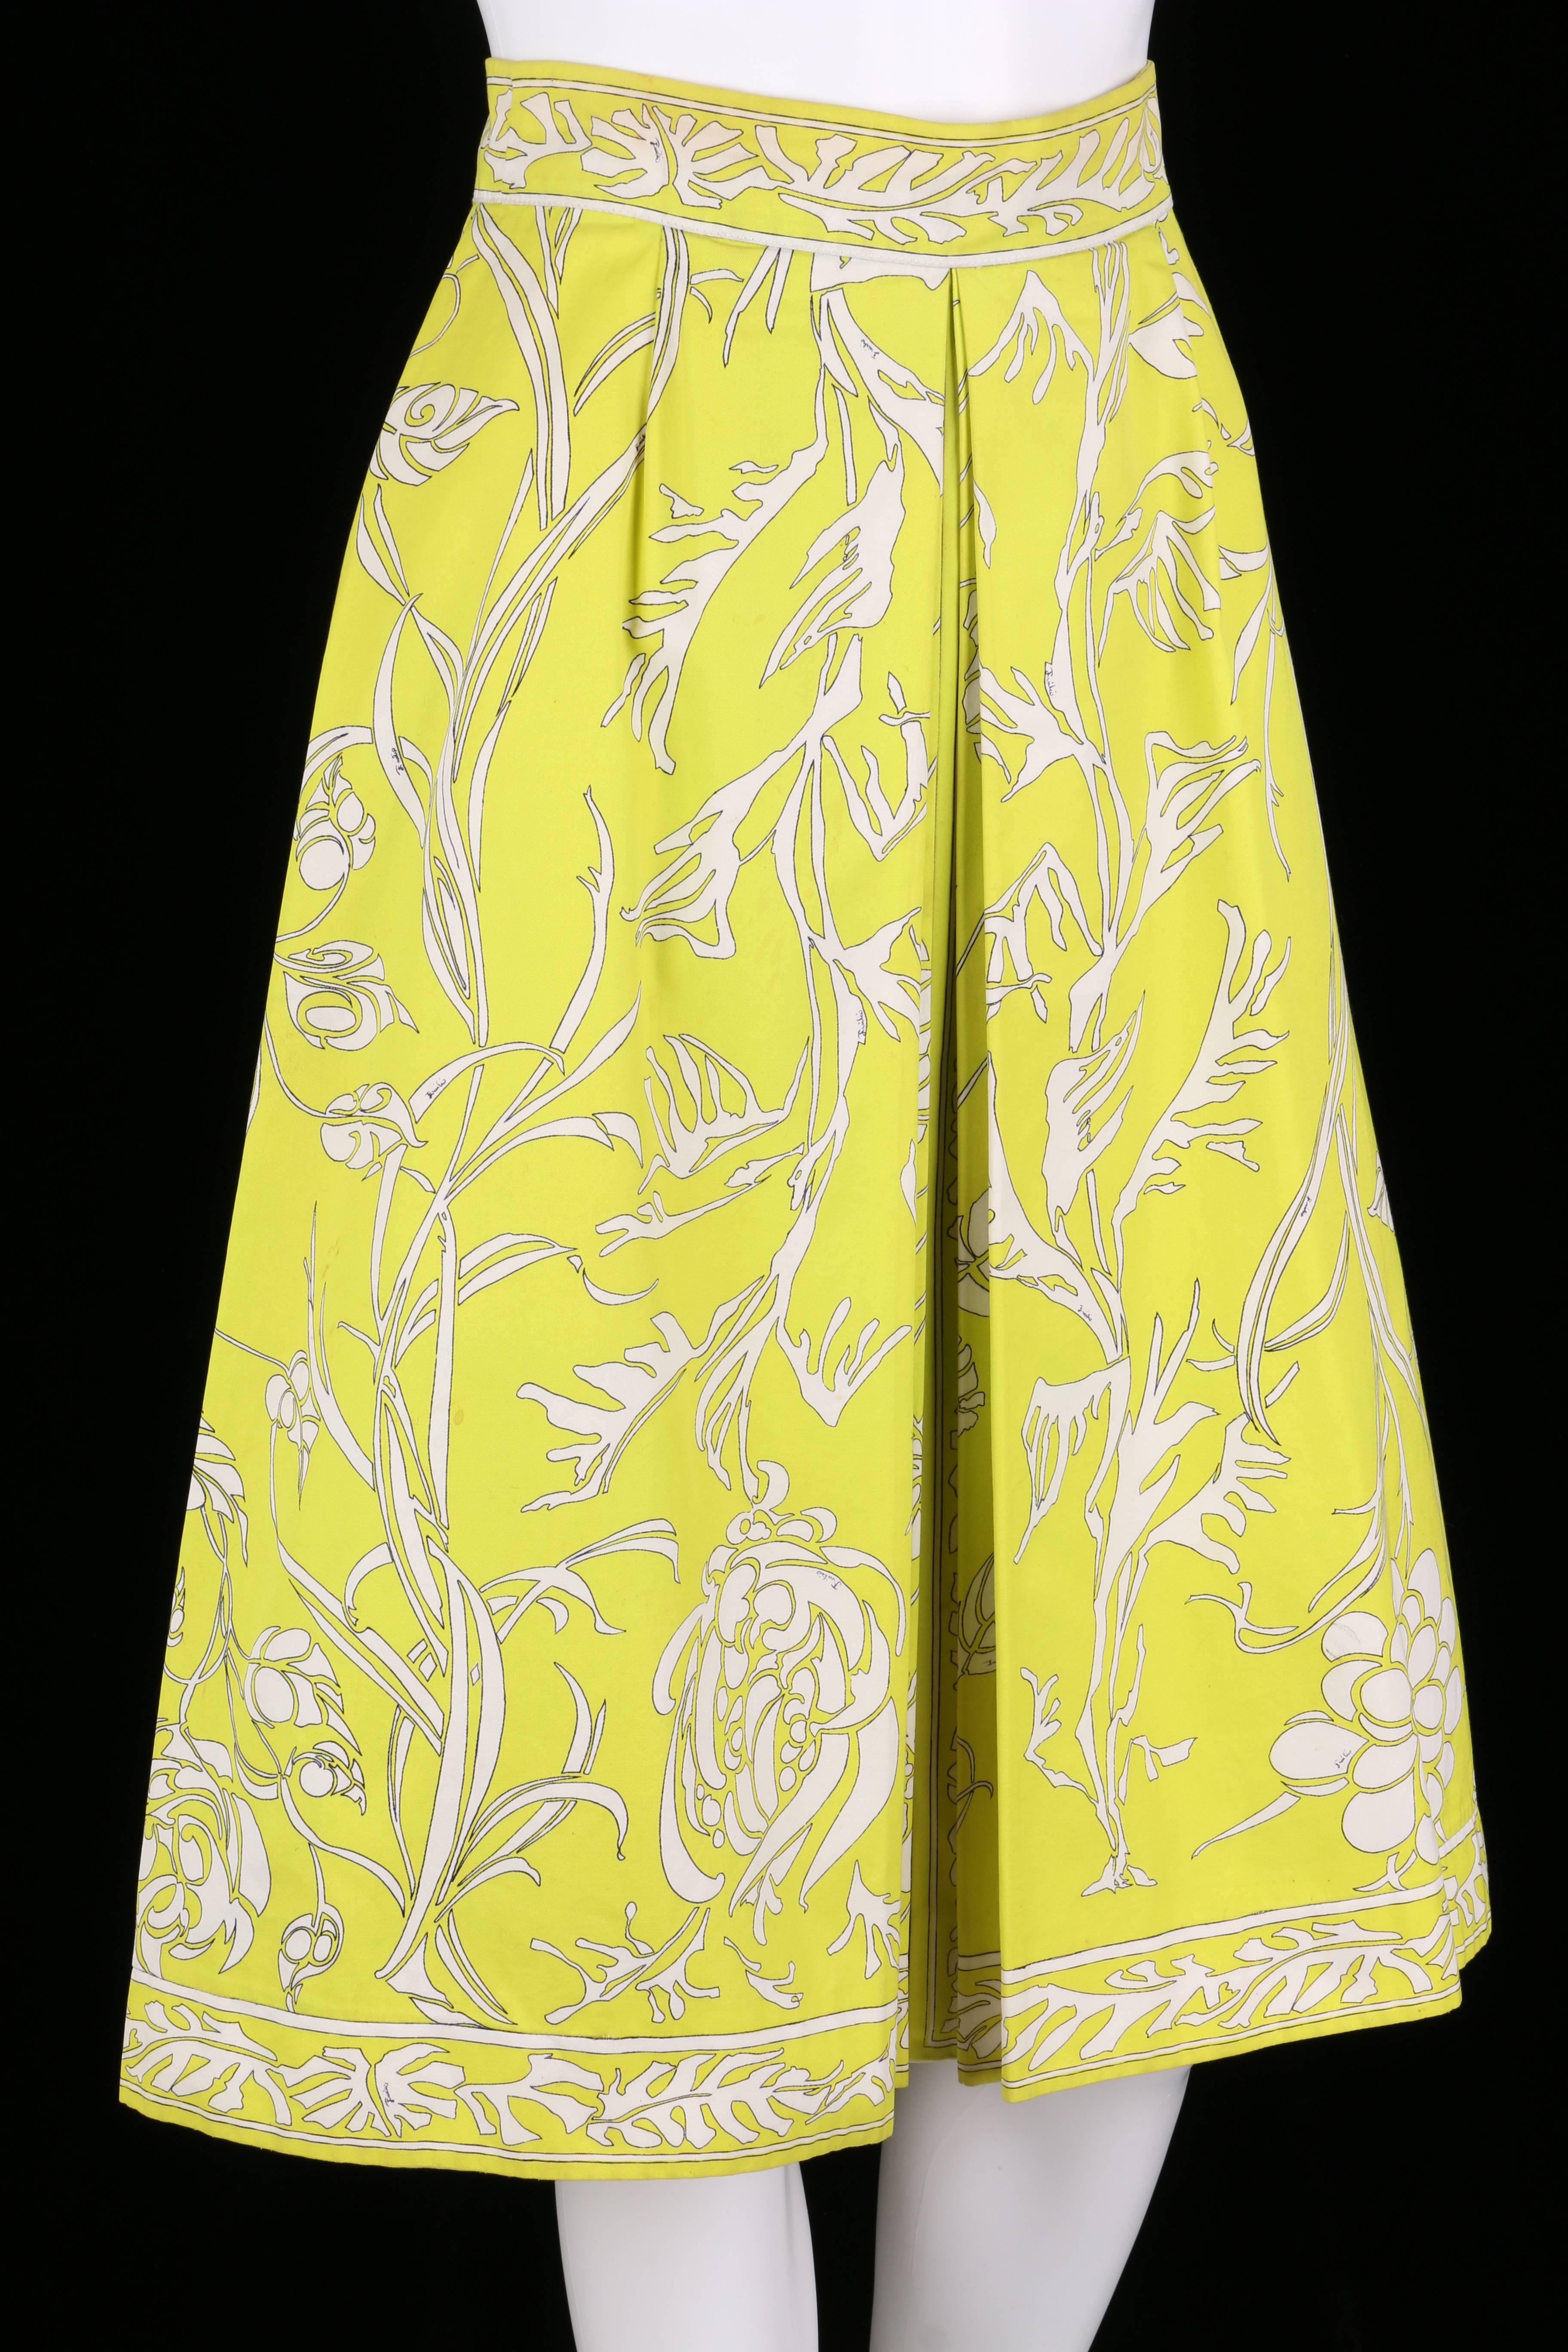 Vintage c.1970s Emilio Pucci chartreuse and white floral print cotton skirt. Center floral motif with fern decorative border. Inverted pleat detail at front. Knee length. Closes at hip with zipper and hook/eye. Please note that this item was pinned